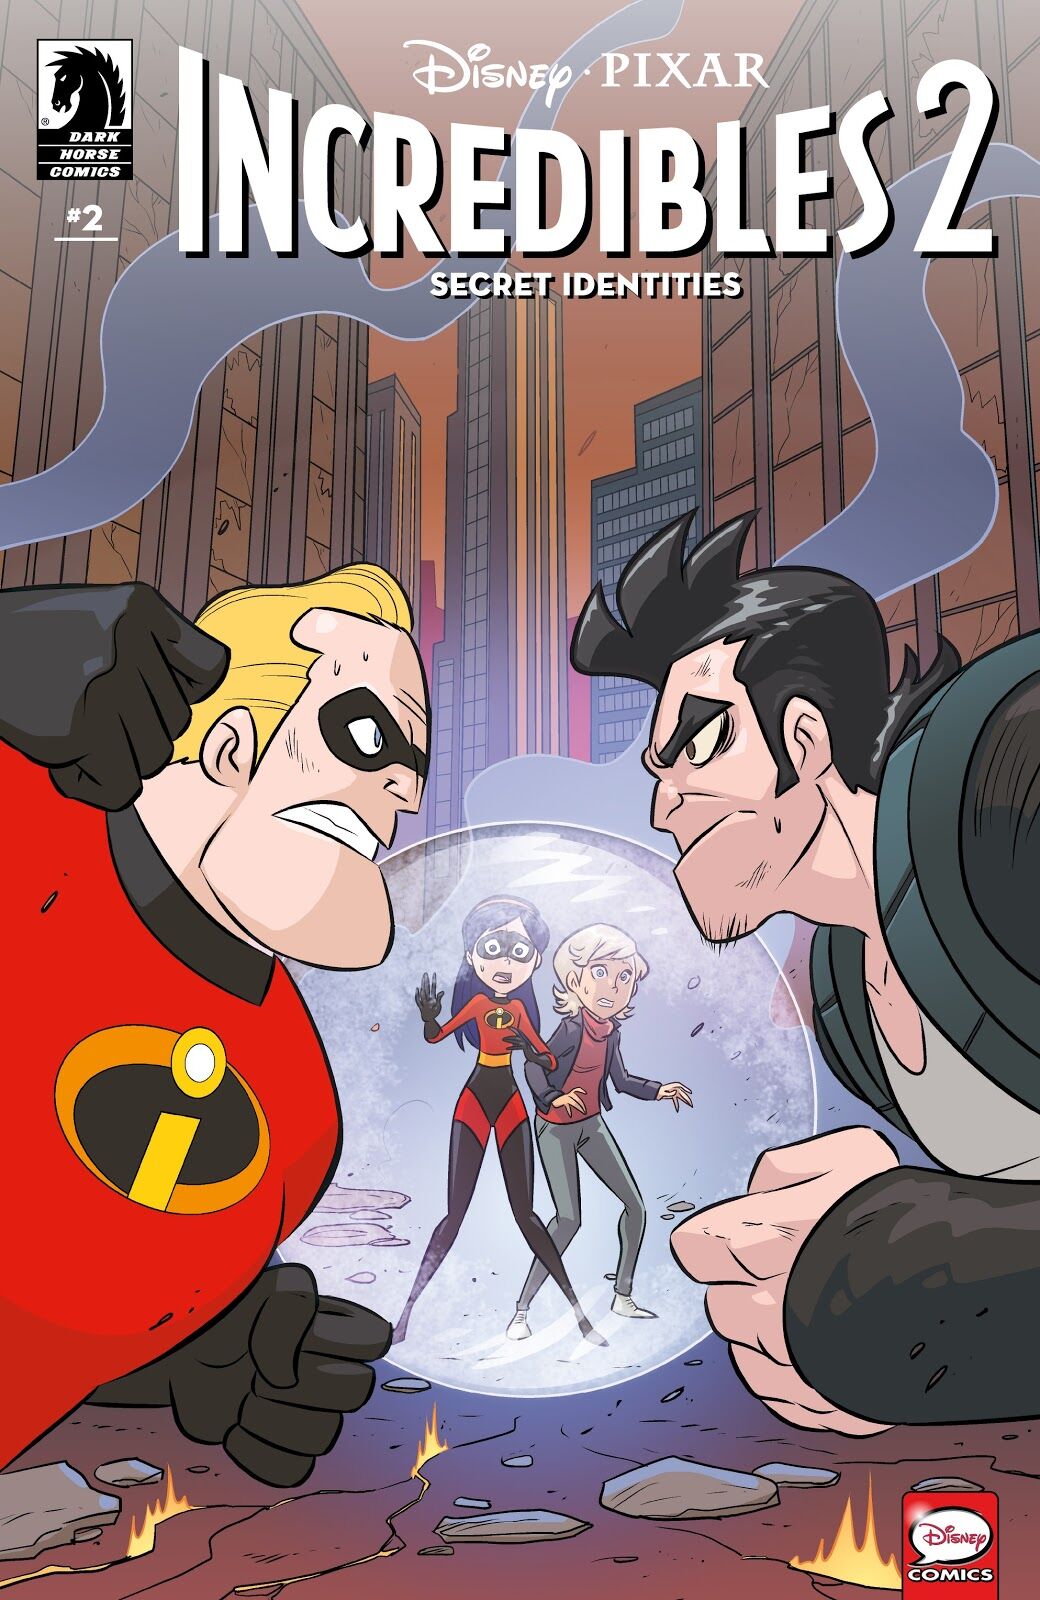 Secret Identities Issue 1, The Incredibles Wiki